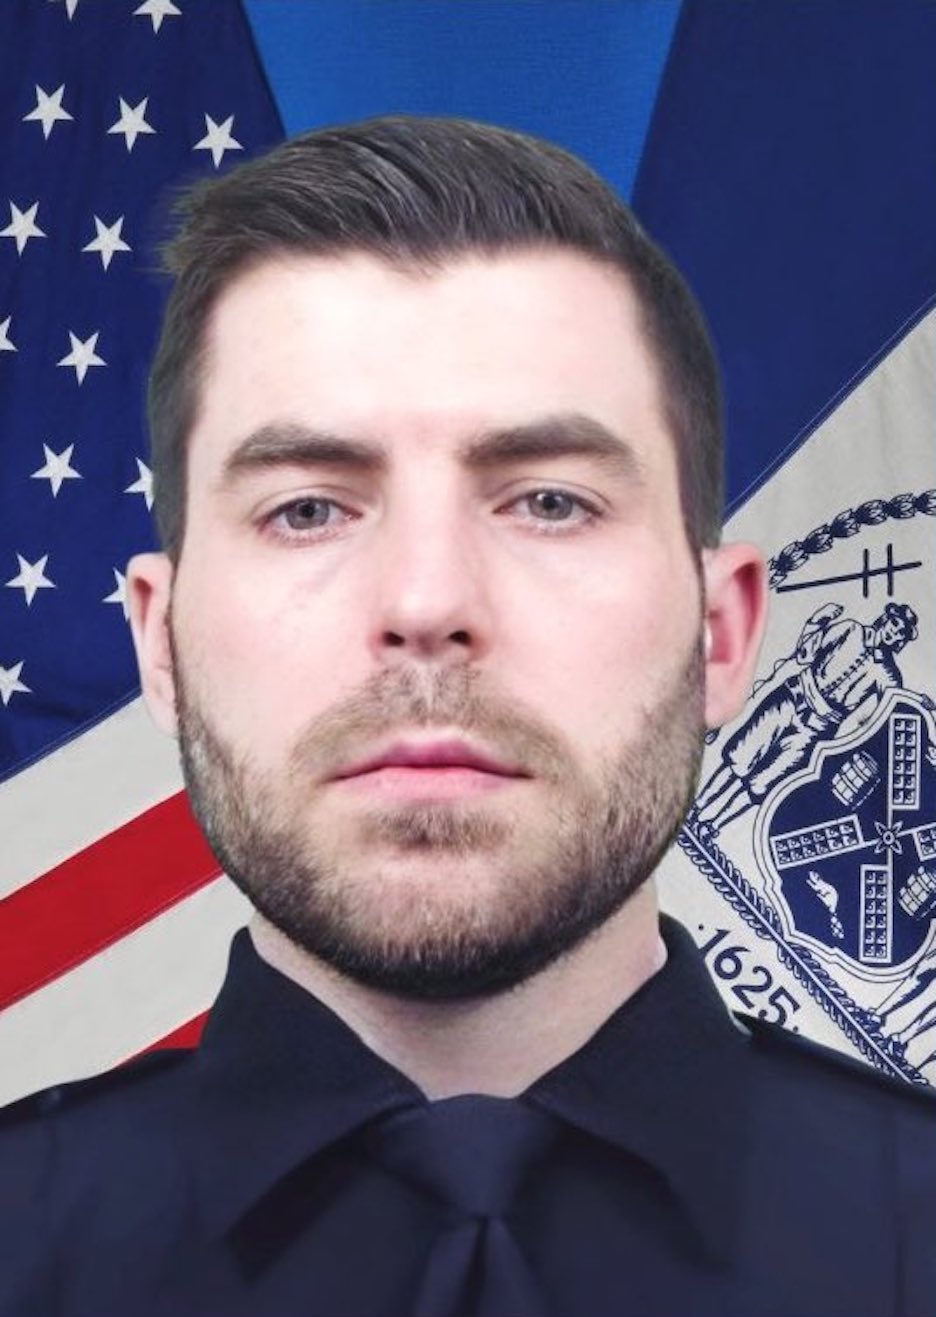 Nonprofit to give $50K to family of fallen NYPD Officer Jonathan Diller